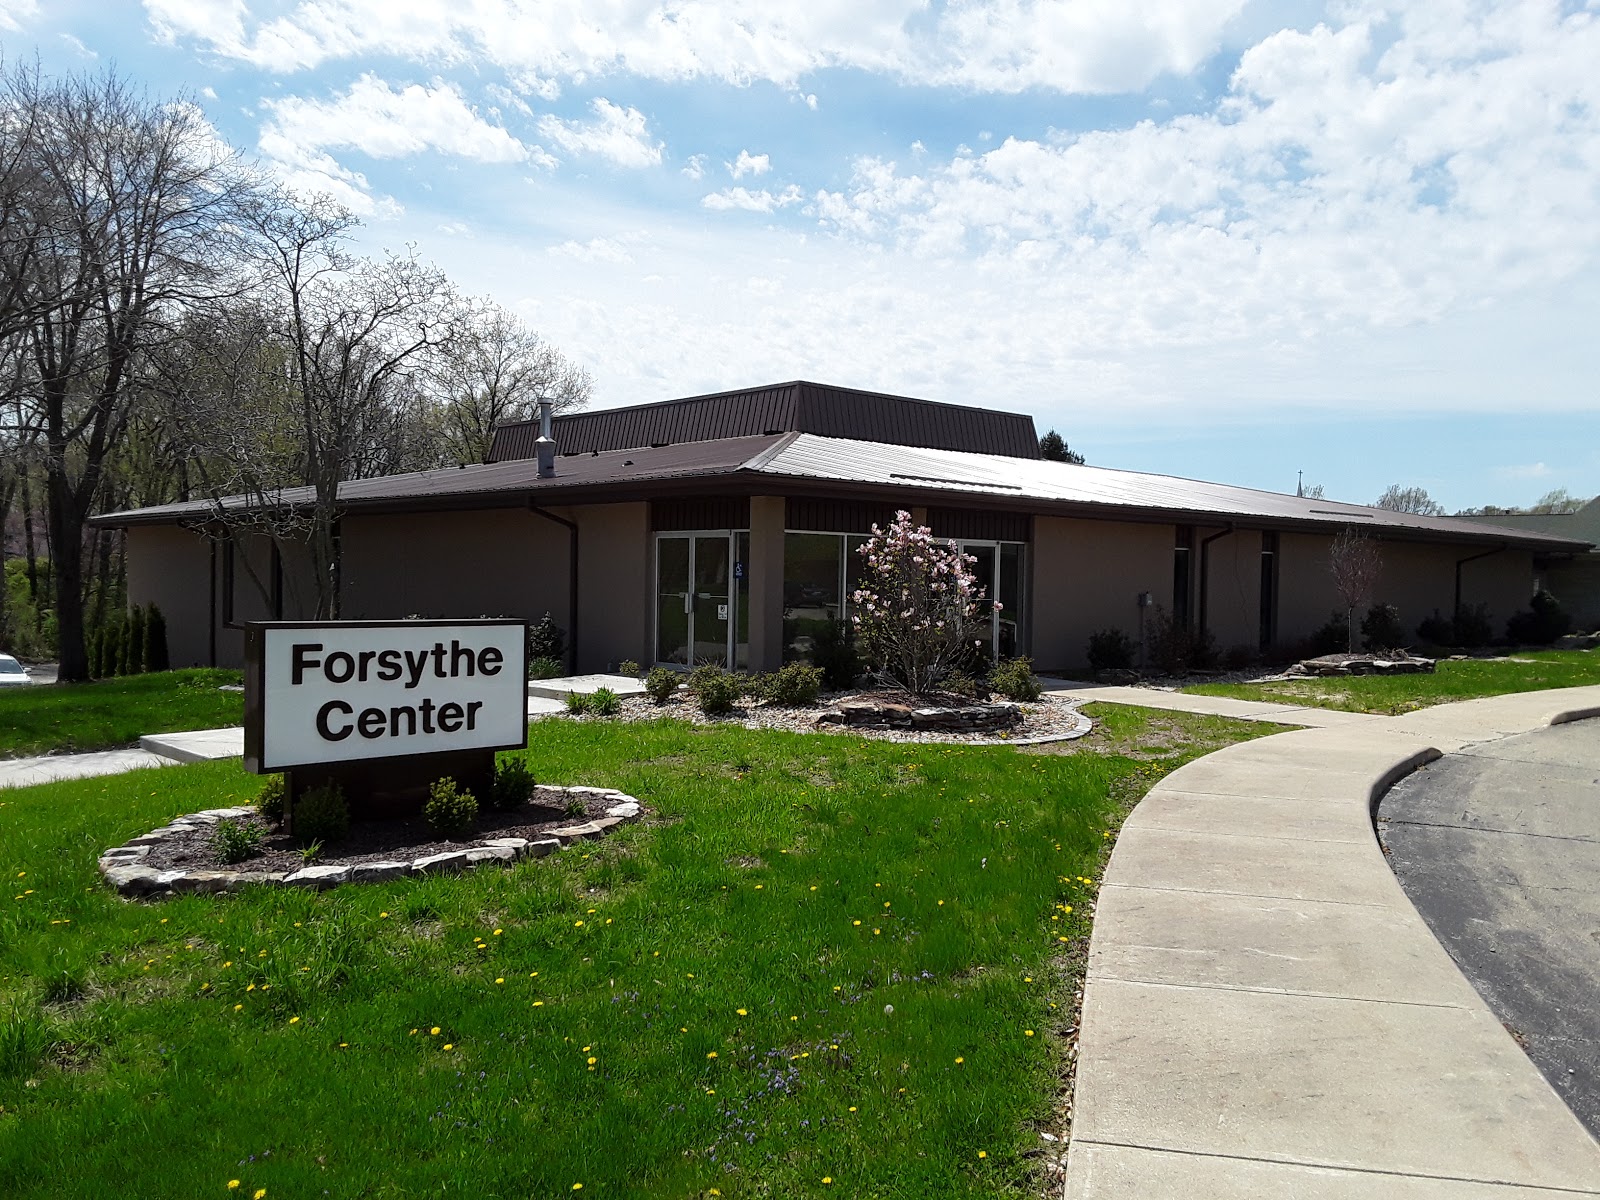 Human Resources Center of Edgar and Clark Counties - Forsythe Center